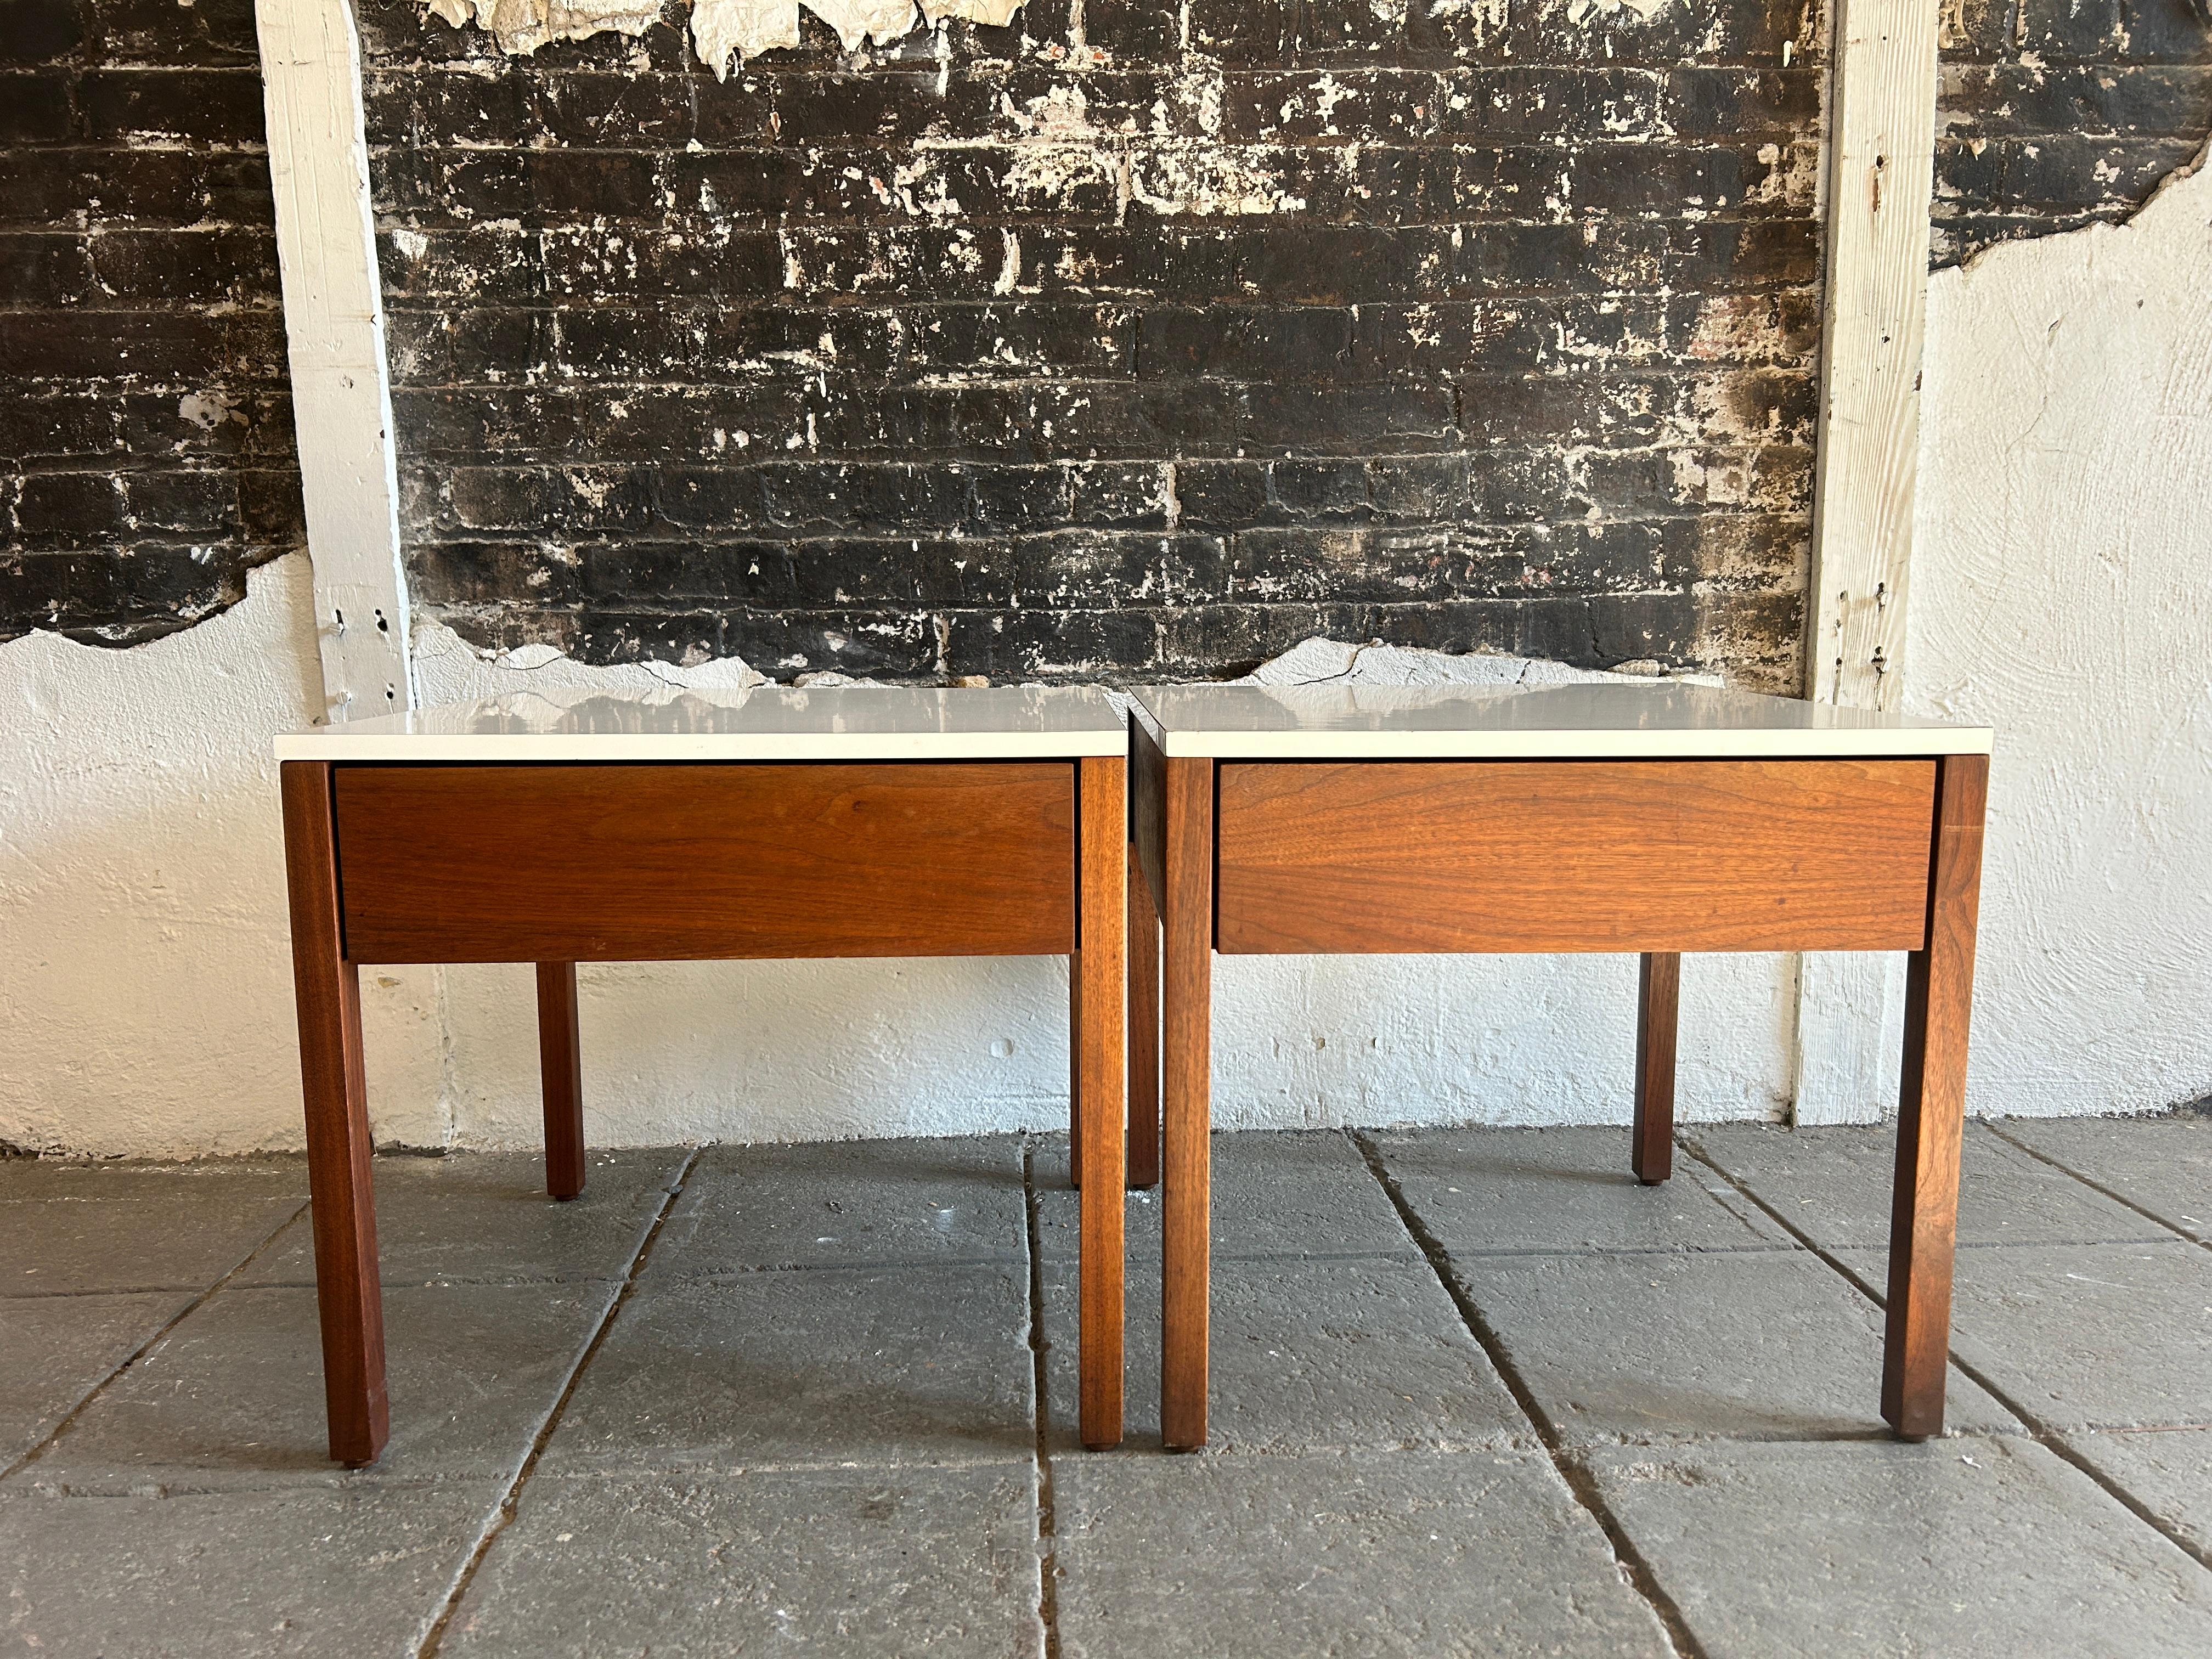 Pair of beautiful Florence knoll single drawer nightstands or side tables. Walnut single drawer nightstands with clean white laminate tops. Solid Oak drawers with single white divider. Has metal drawer slides. Both are labeled knoll. Located in